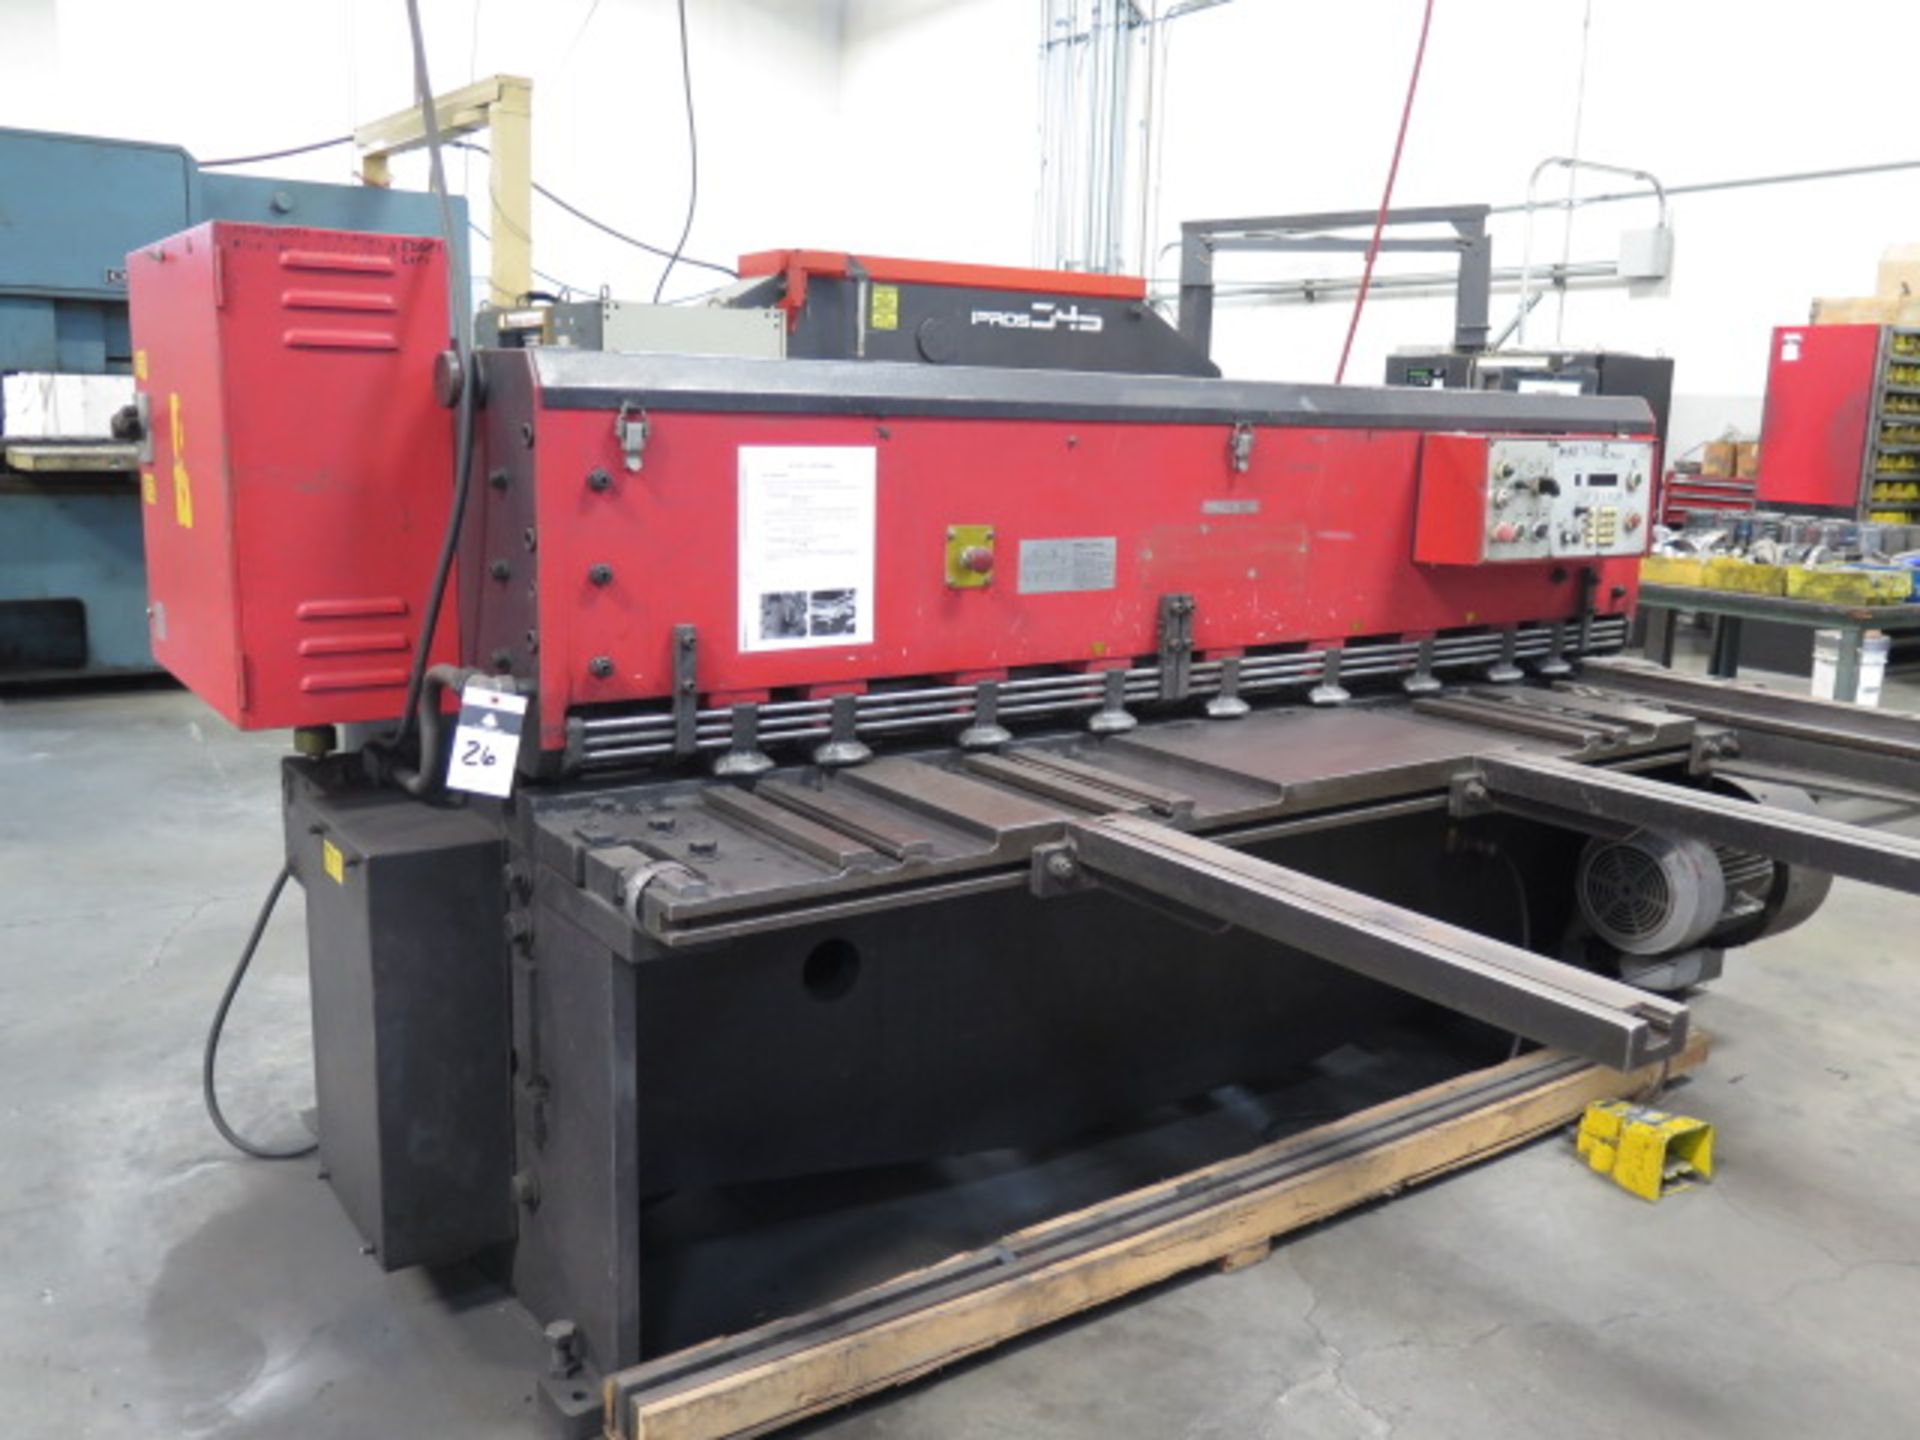 Amada M-2060 ¼” x 78” Power Shear s/n 20600686 w/ Amada Controls and Back Gauging, SOLD AS IS - Image 3 of 14